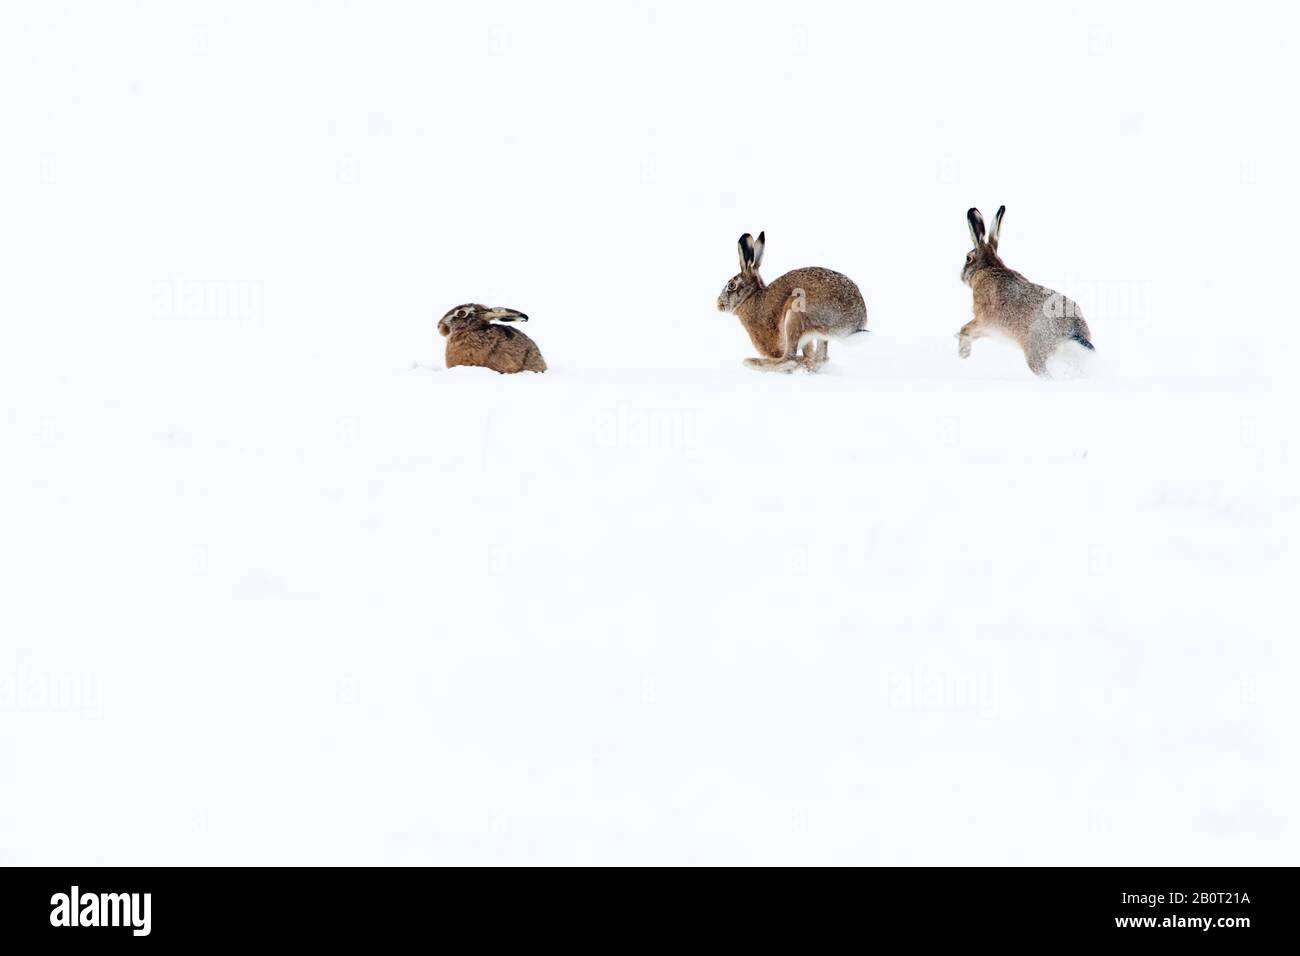 European hare, Brown hare (Lepus europaeus), three hares in snowy landscape, Netherlands Stock Photo